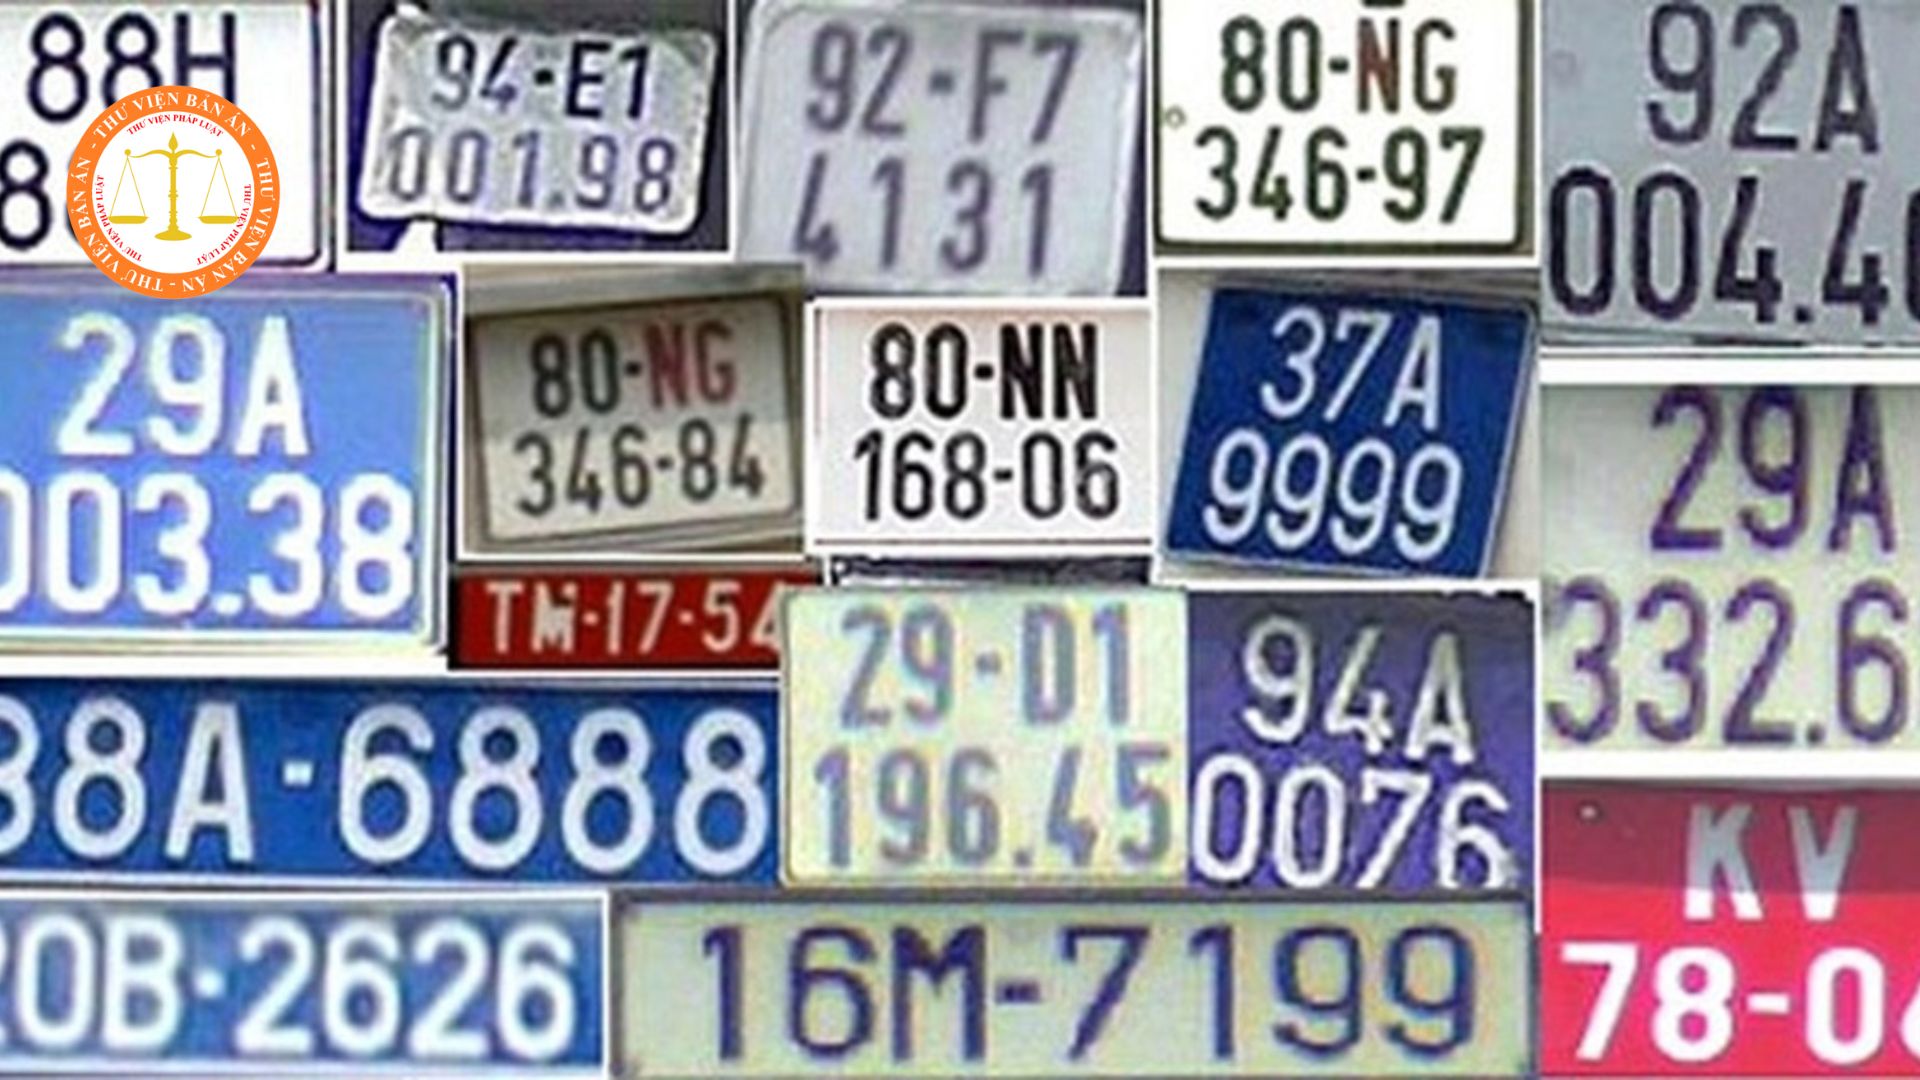 How to distinguish between those license plates by colors and symbols in Vietnam